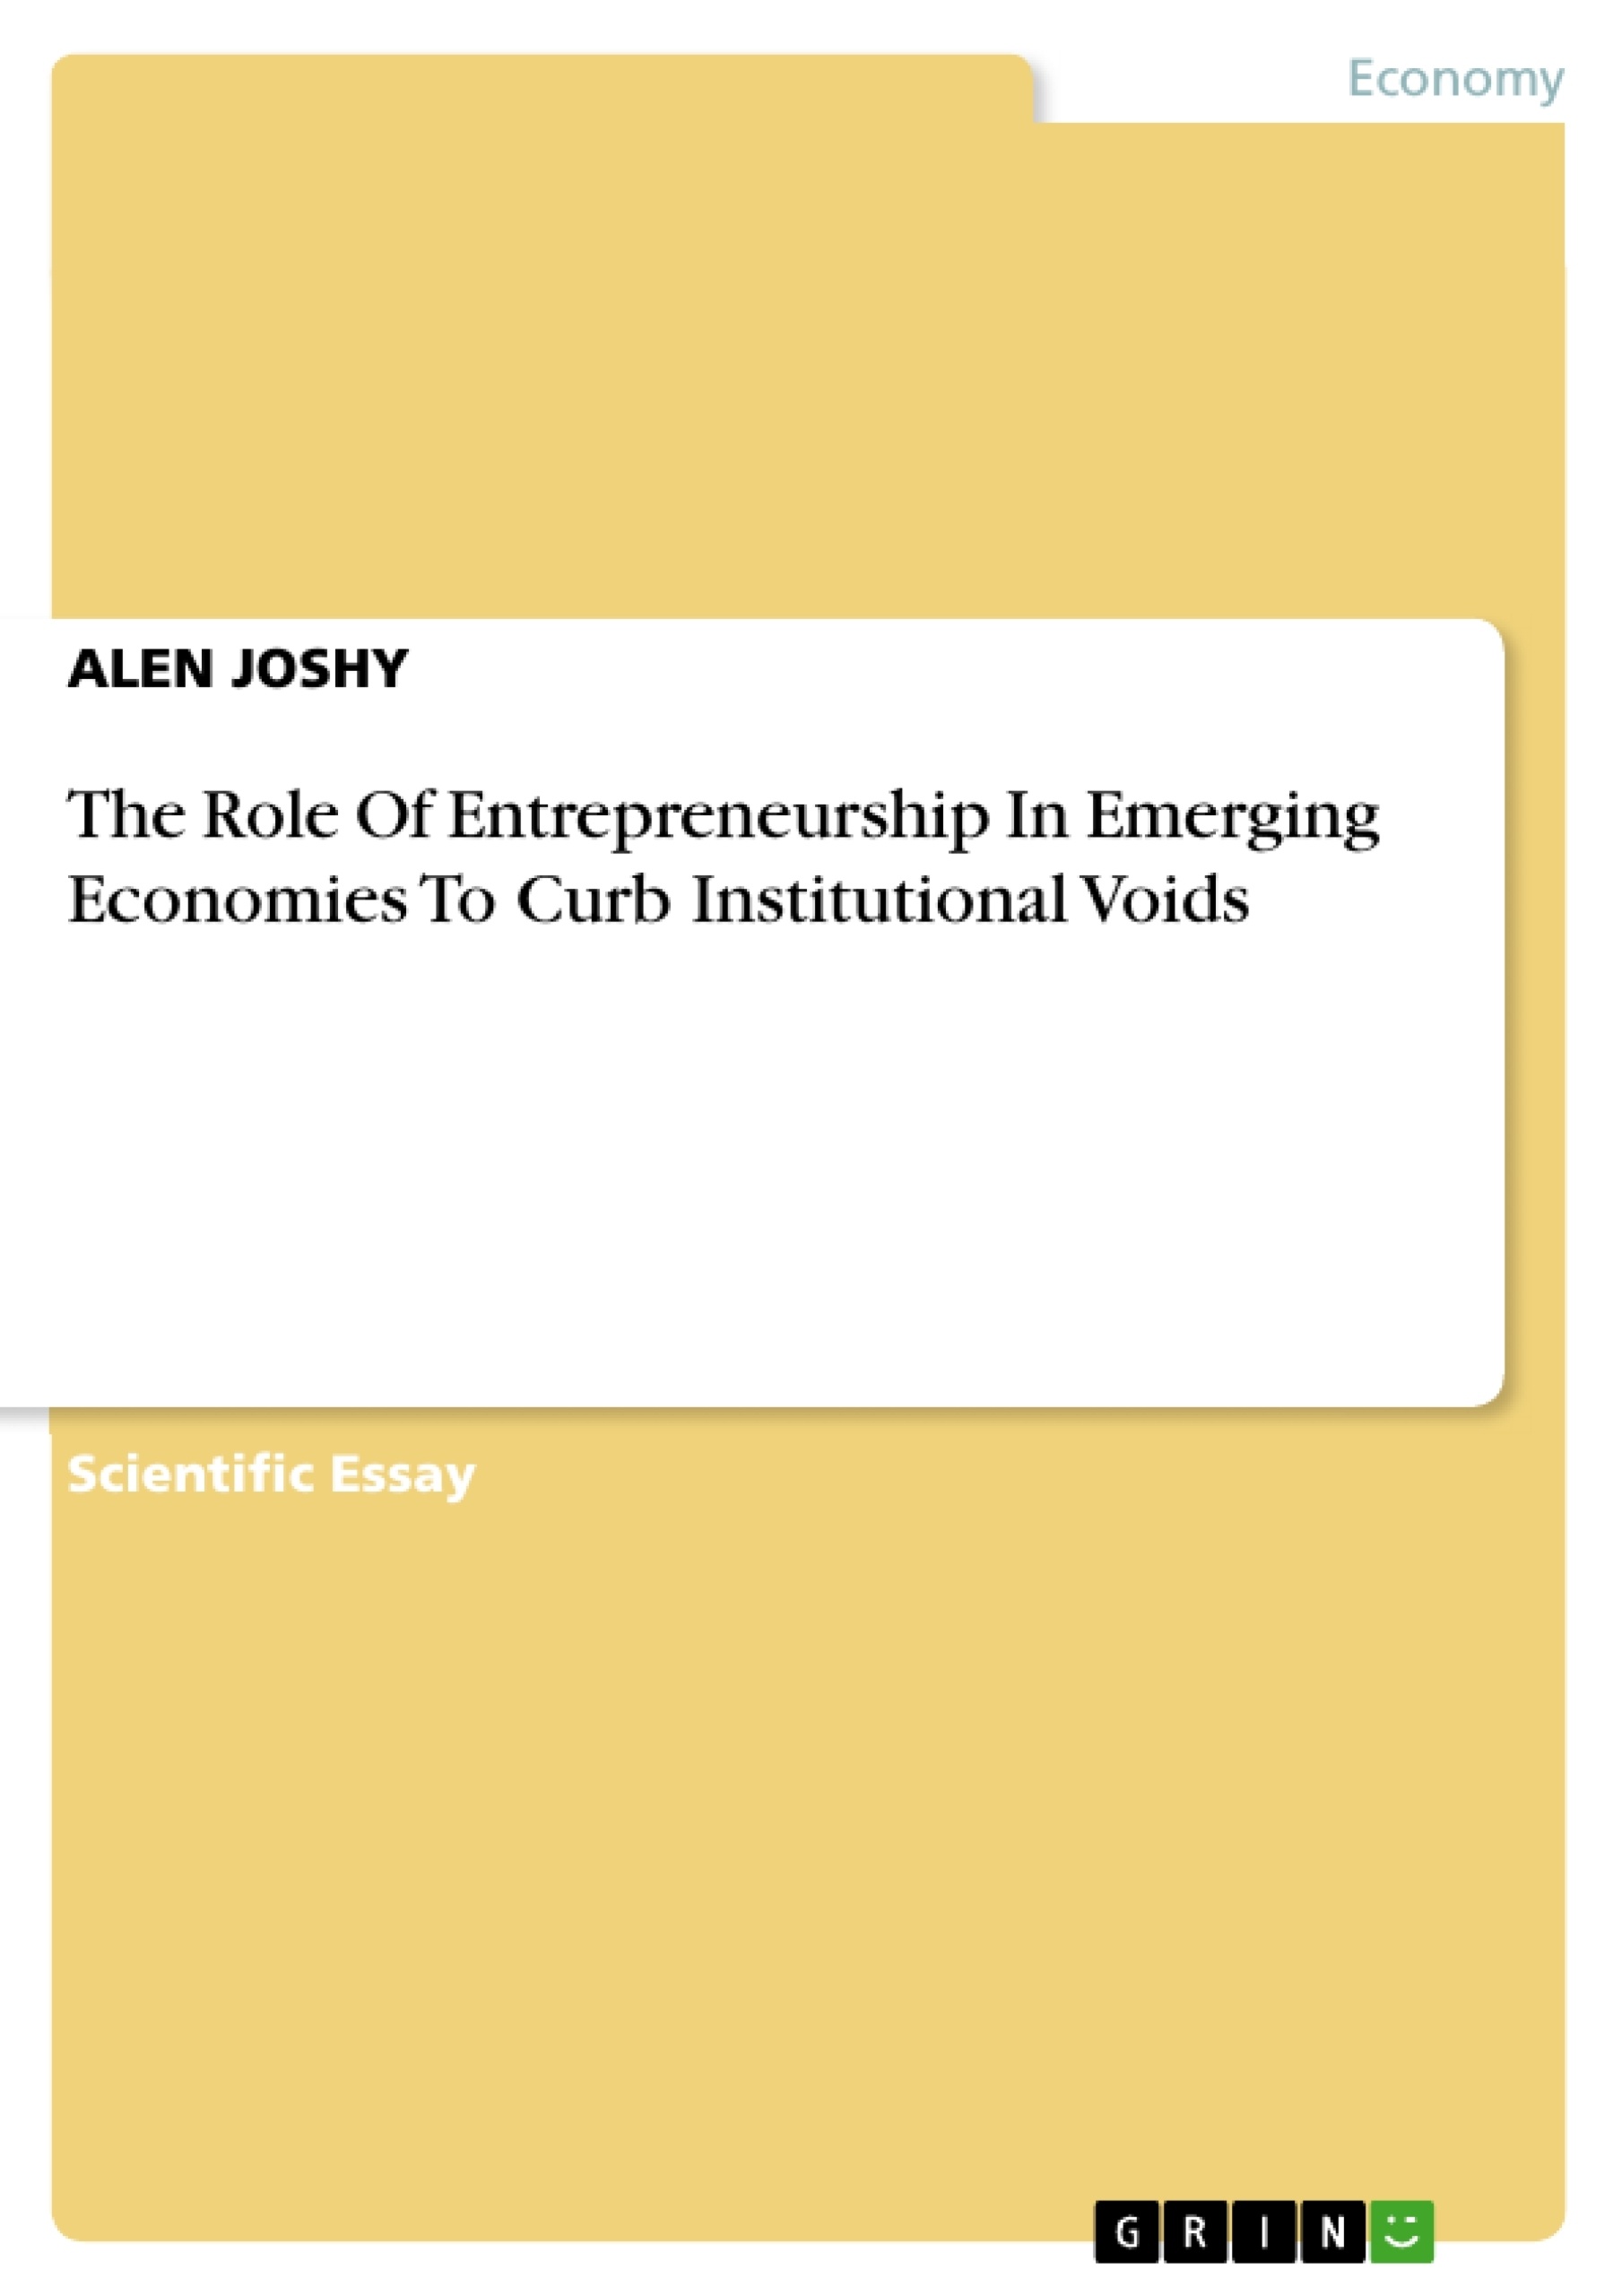 Título: The Role Of Entrepreneurship In Emerging Economies To Curb Institutional Voids